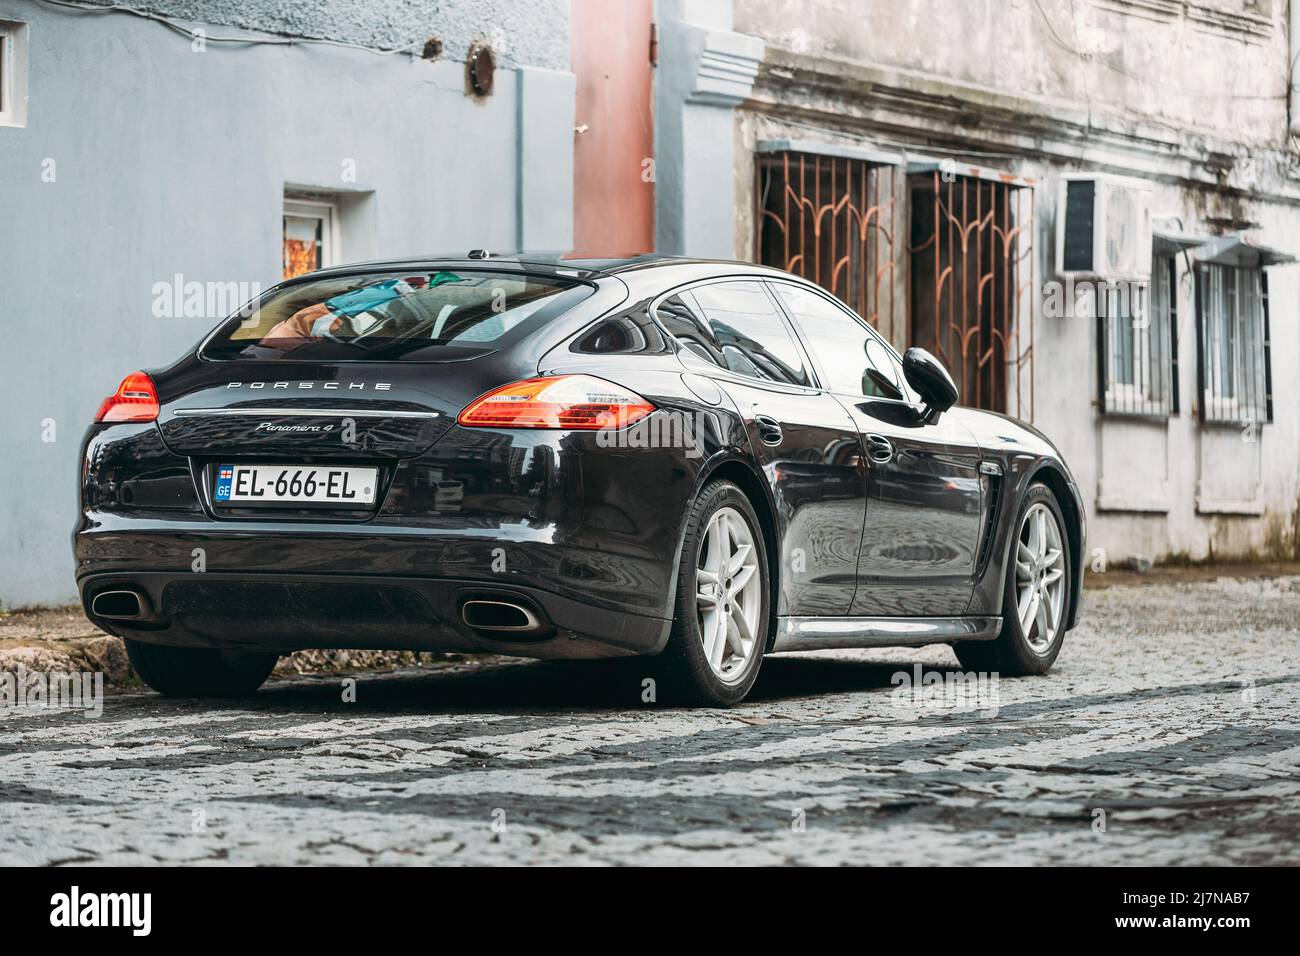 Black porsche panamera 4 Parking In City Street with old buildings. Stock Photo